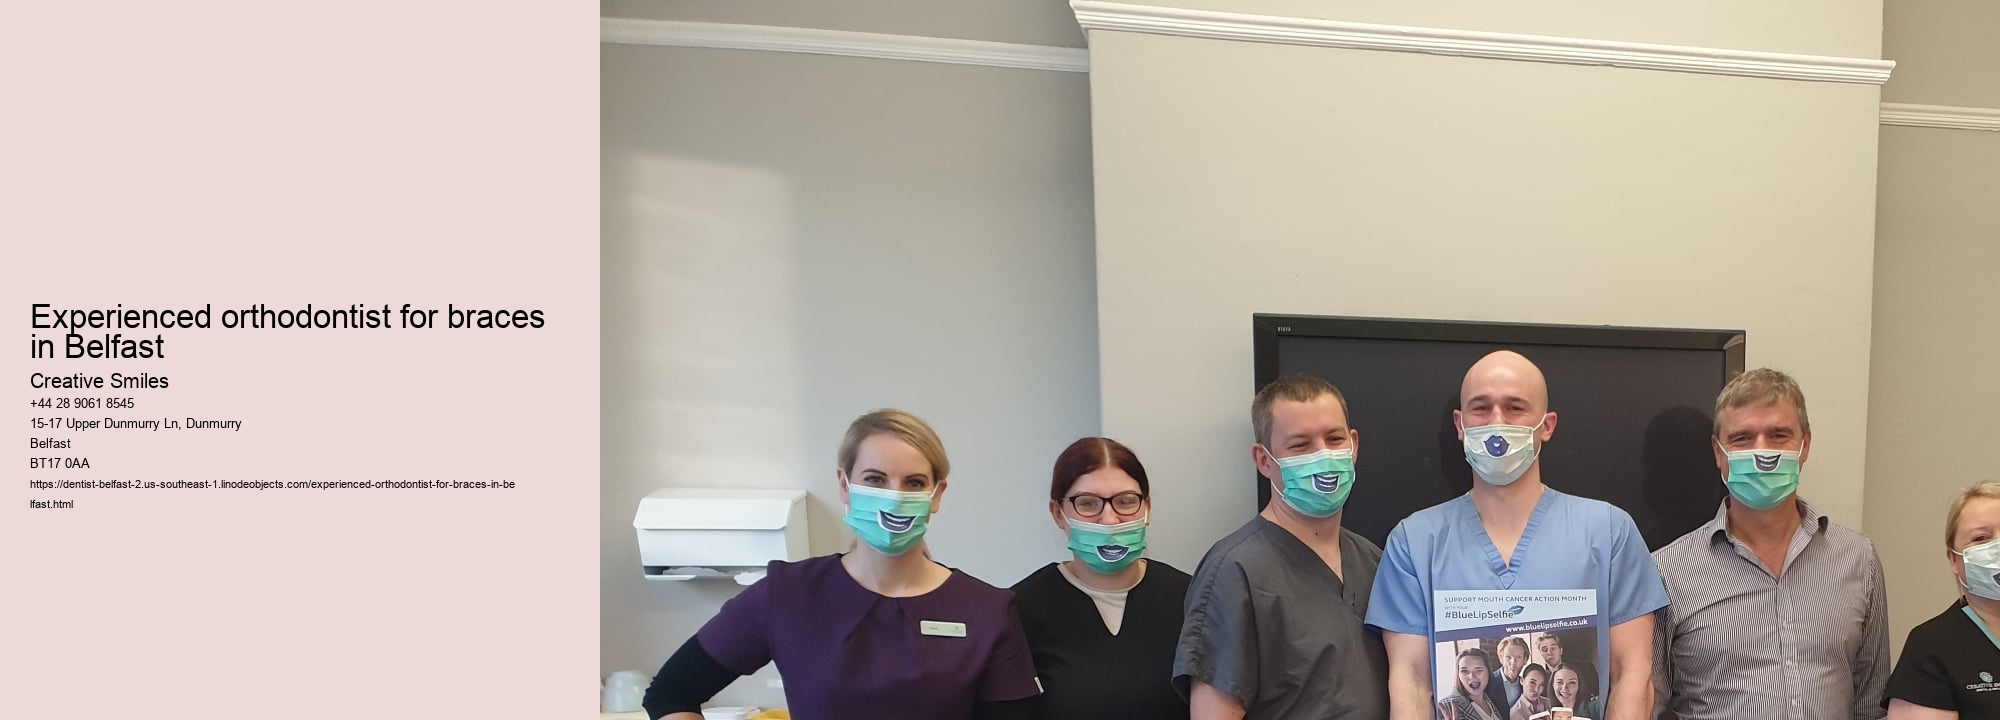 Experienced orthodontist for braces in Belfast